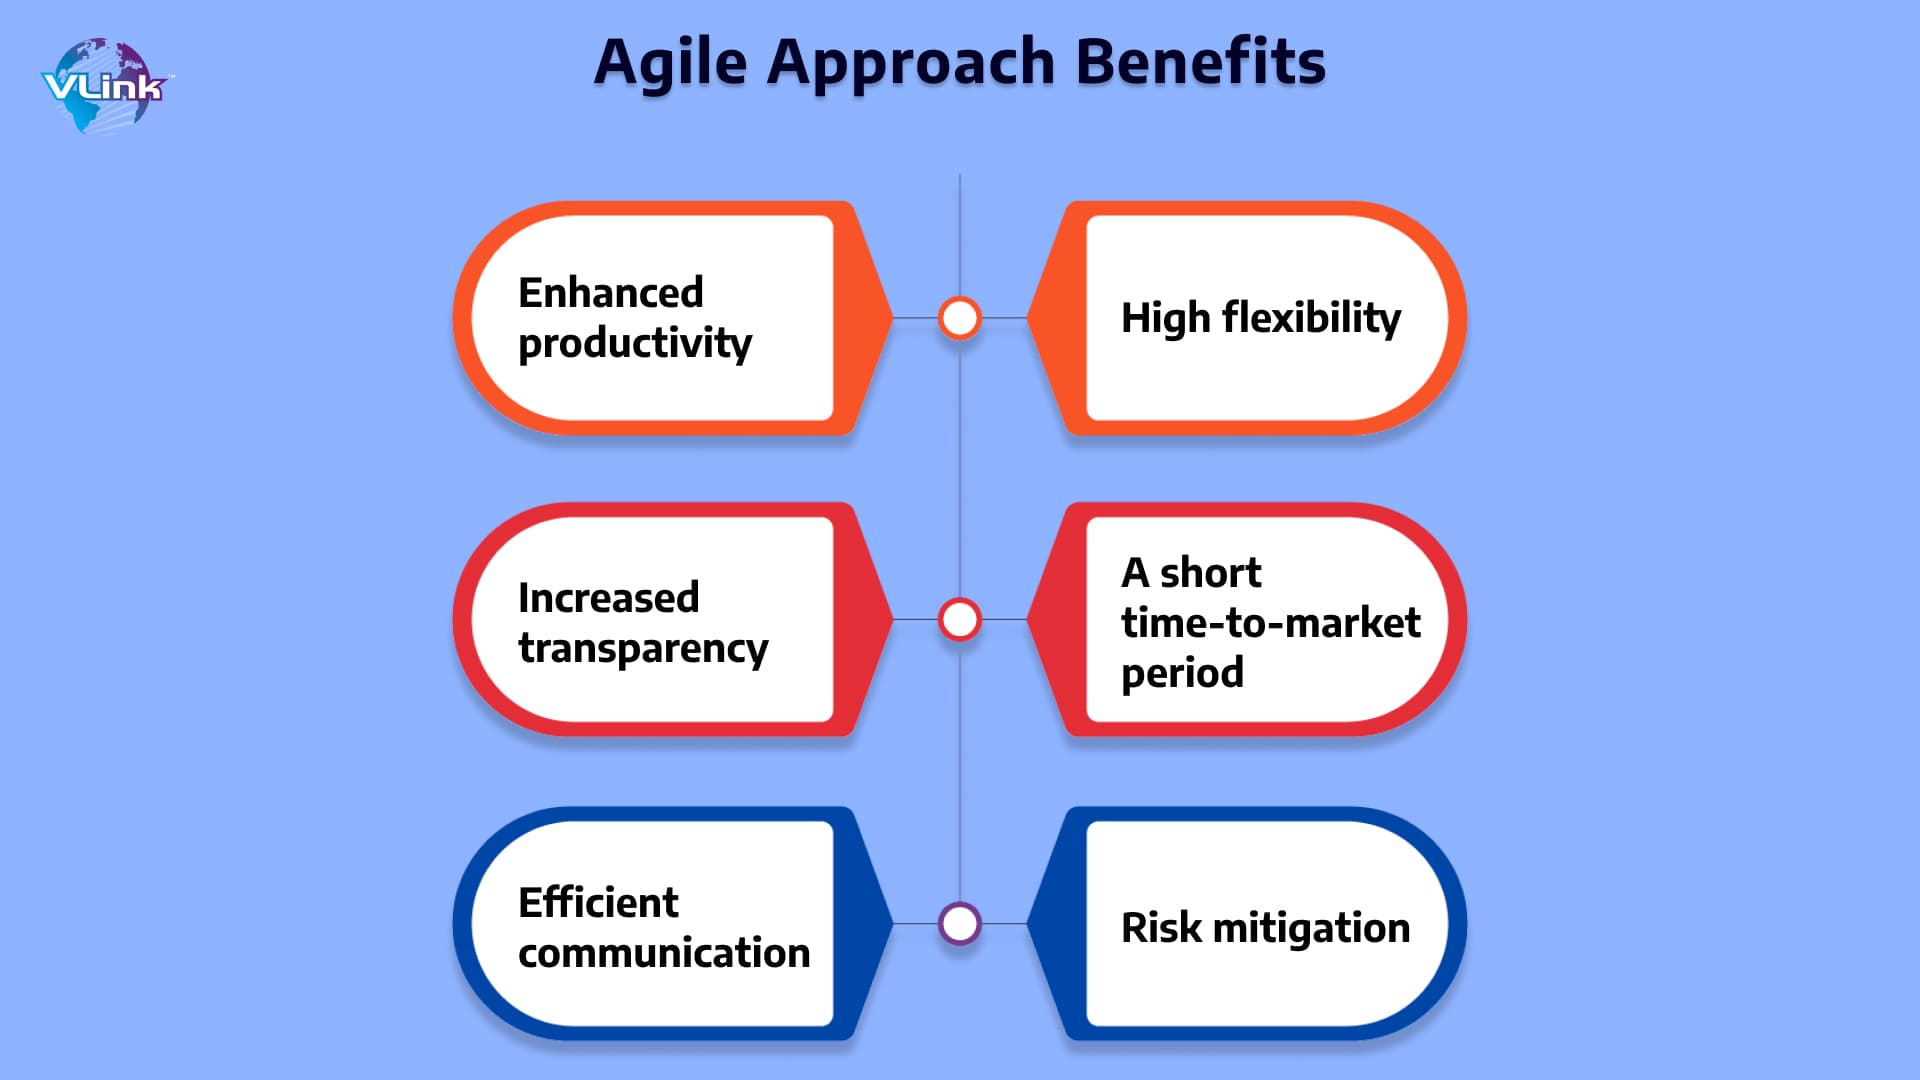 key benefits of the Agile approach